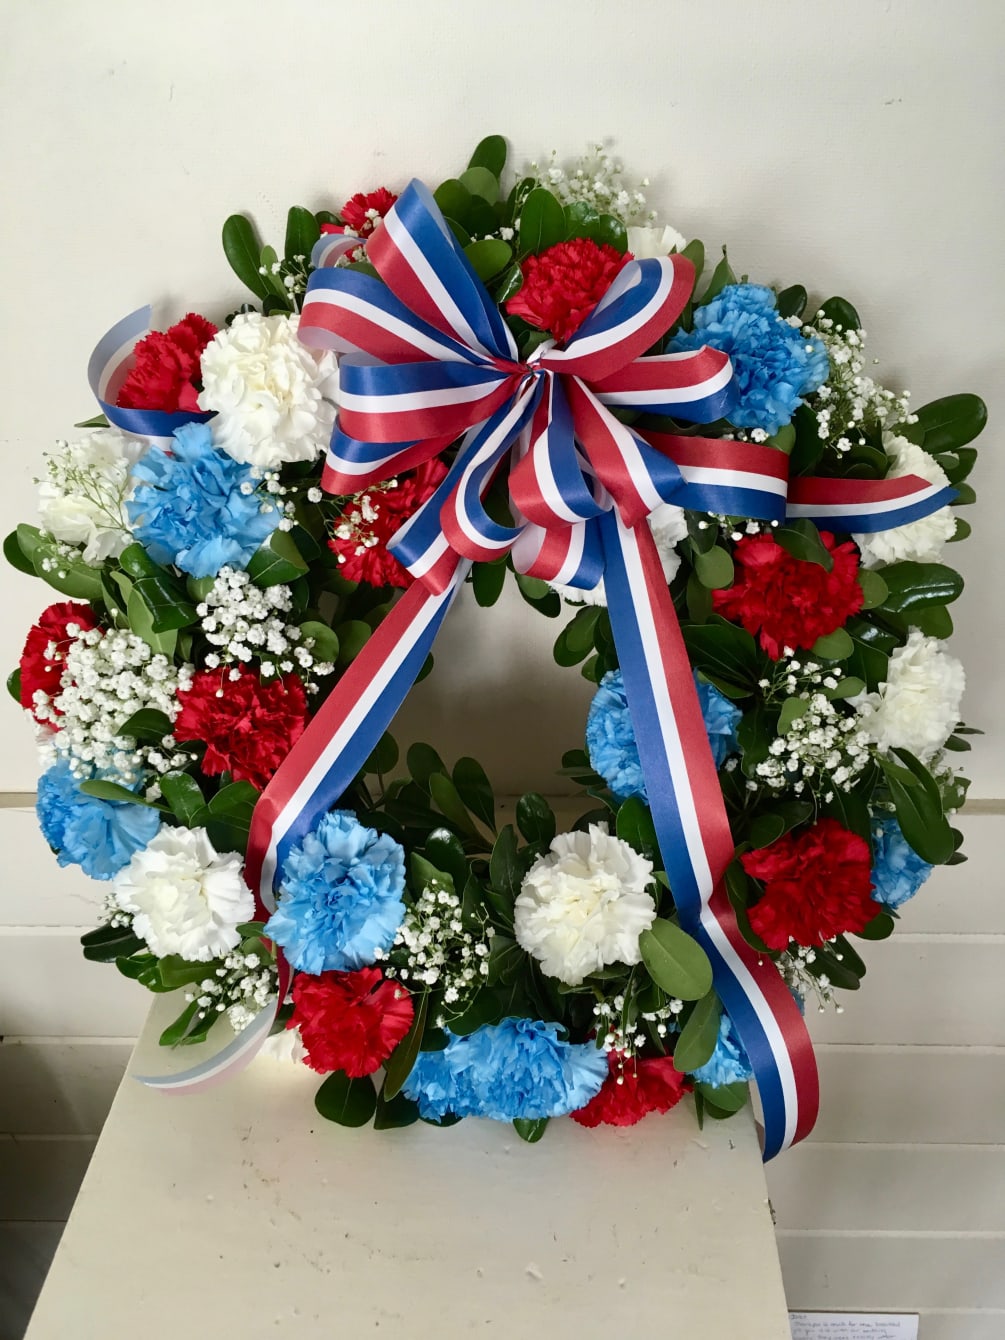 18 inch round wreath with greenery boasting red, white and blue carnations